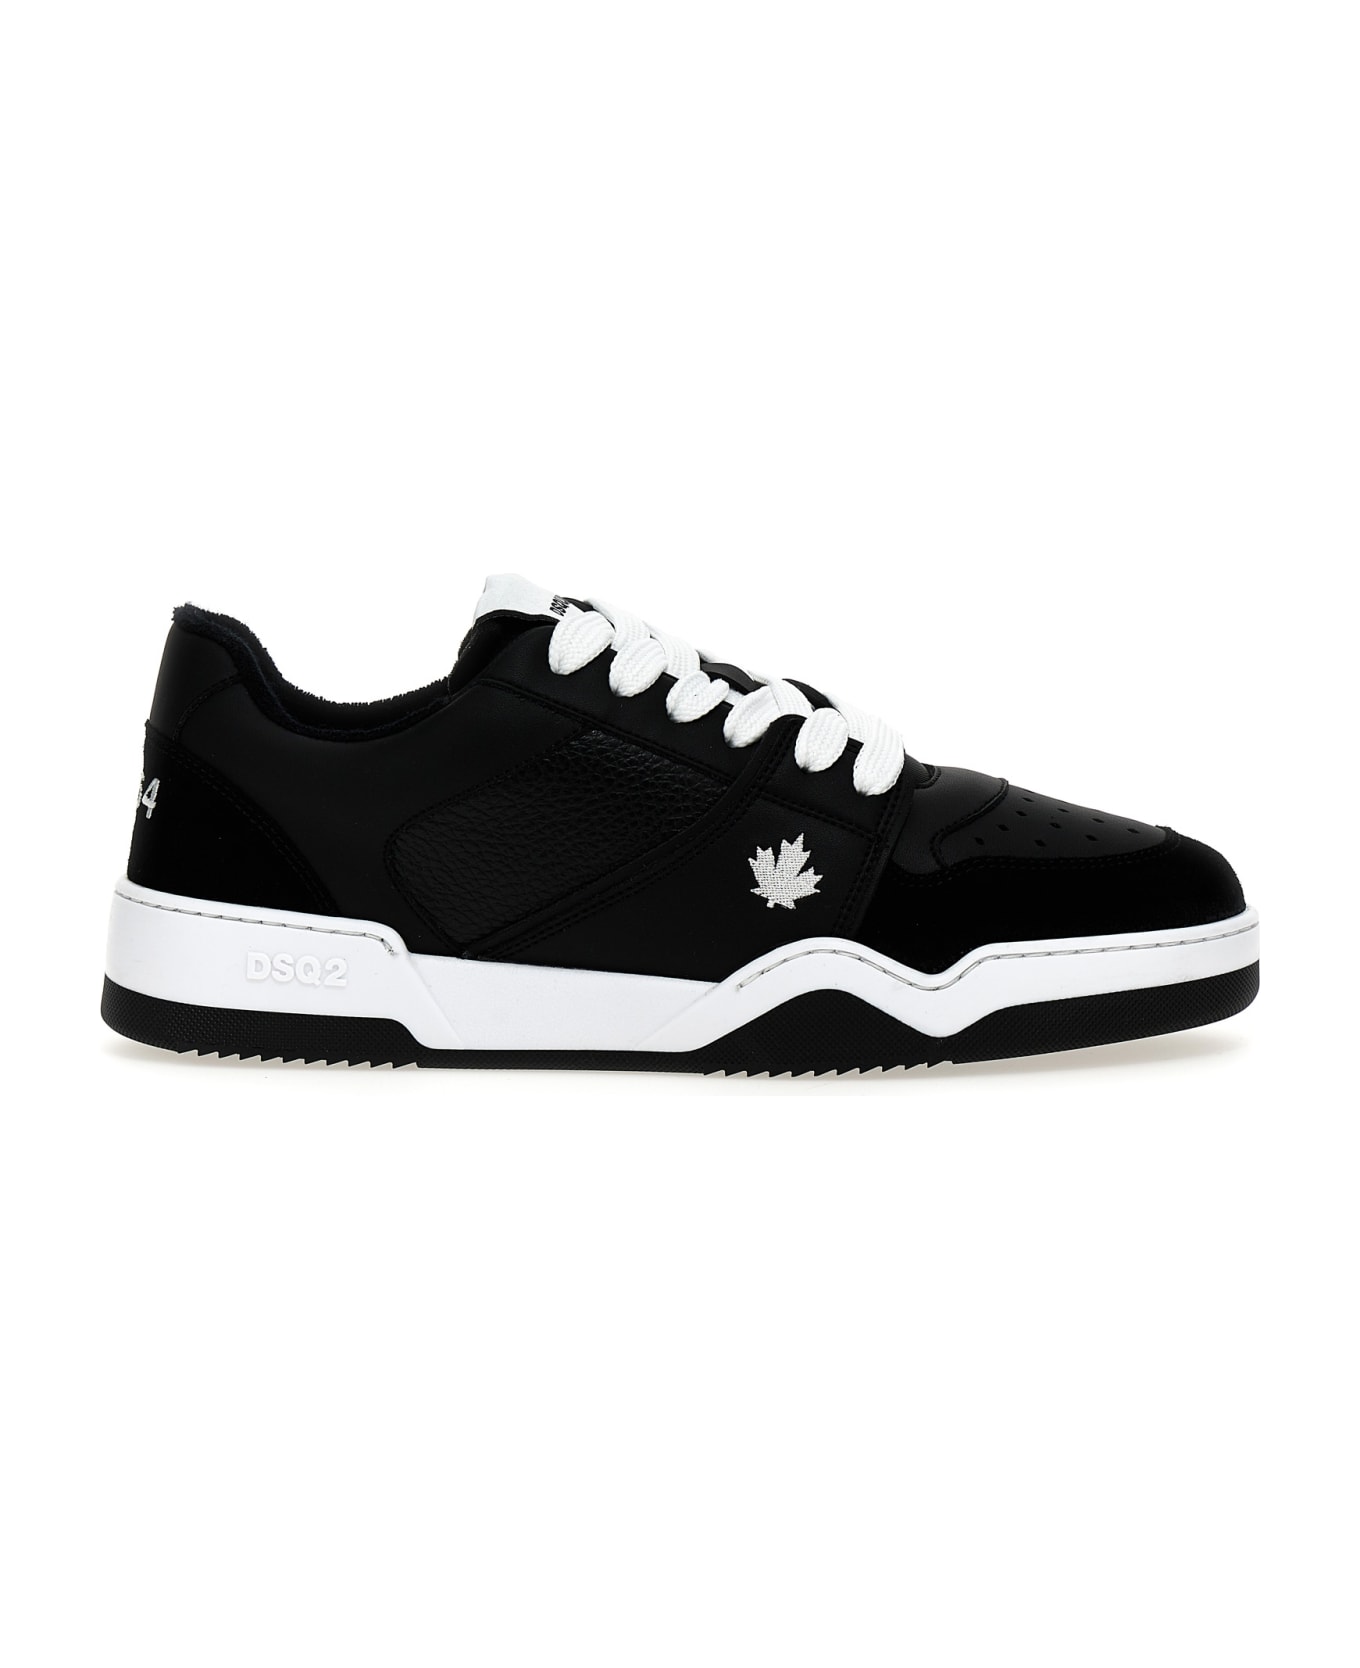 Dsquared2 Spiker Lace-up Low Top Sneakers - White/Black